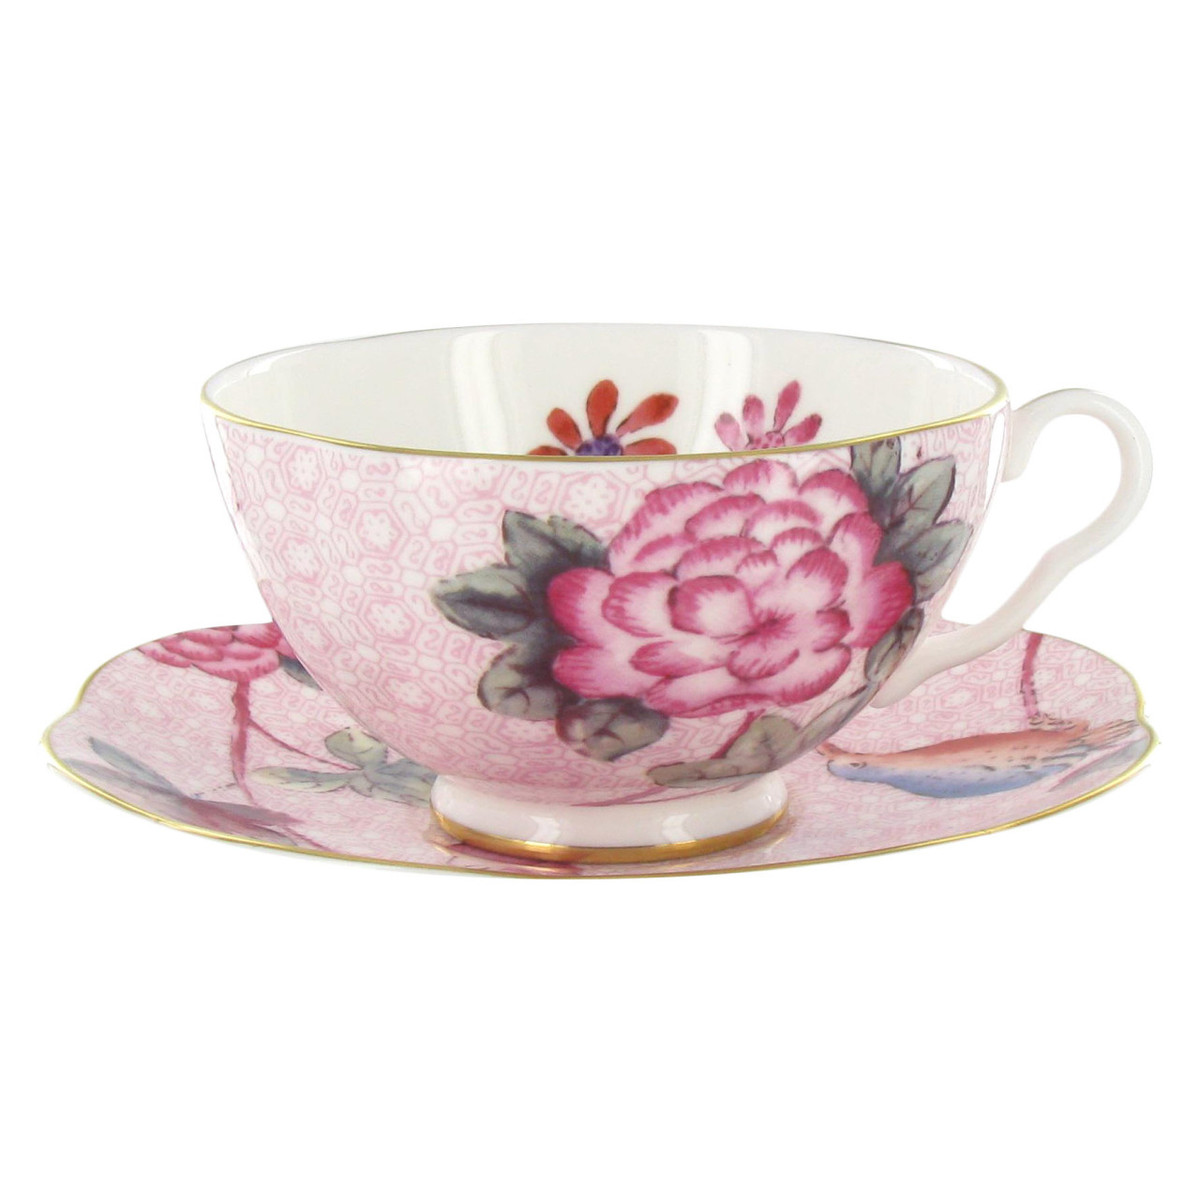 Wedgwood Harlequin Collection Deco Bloom Cup & Saucer